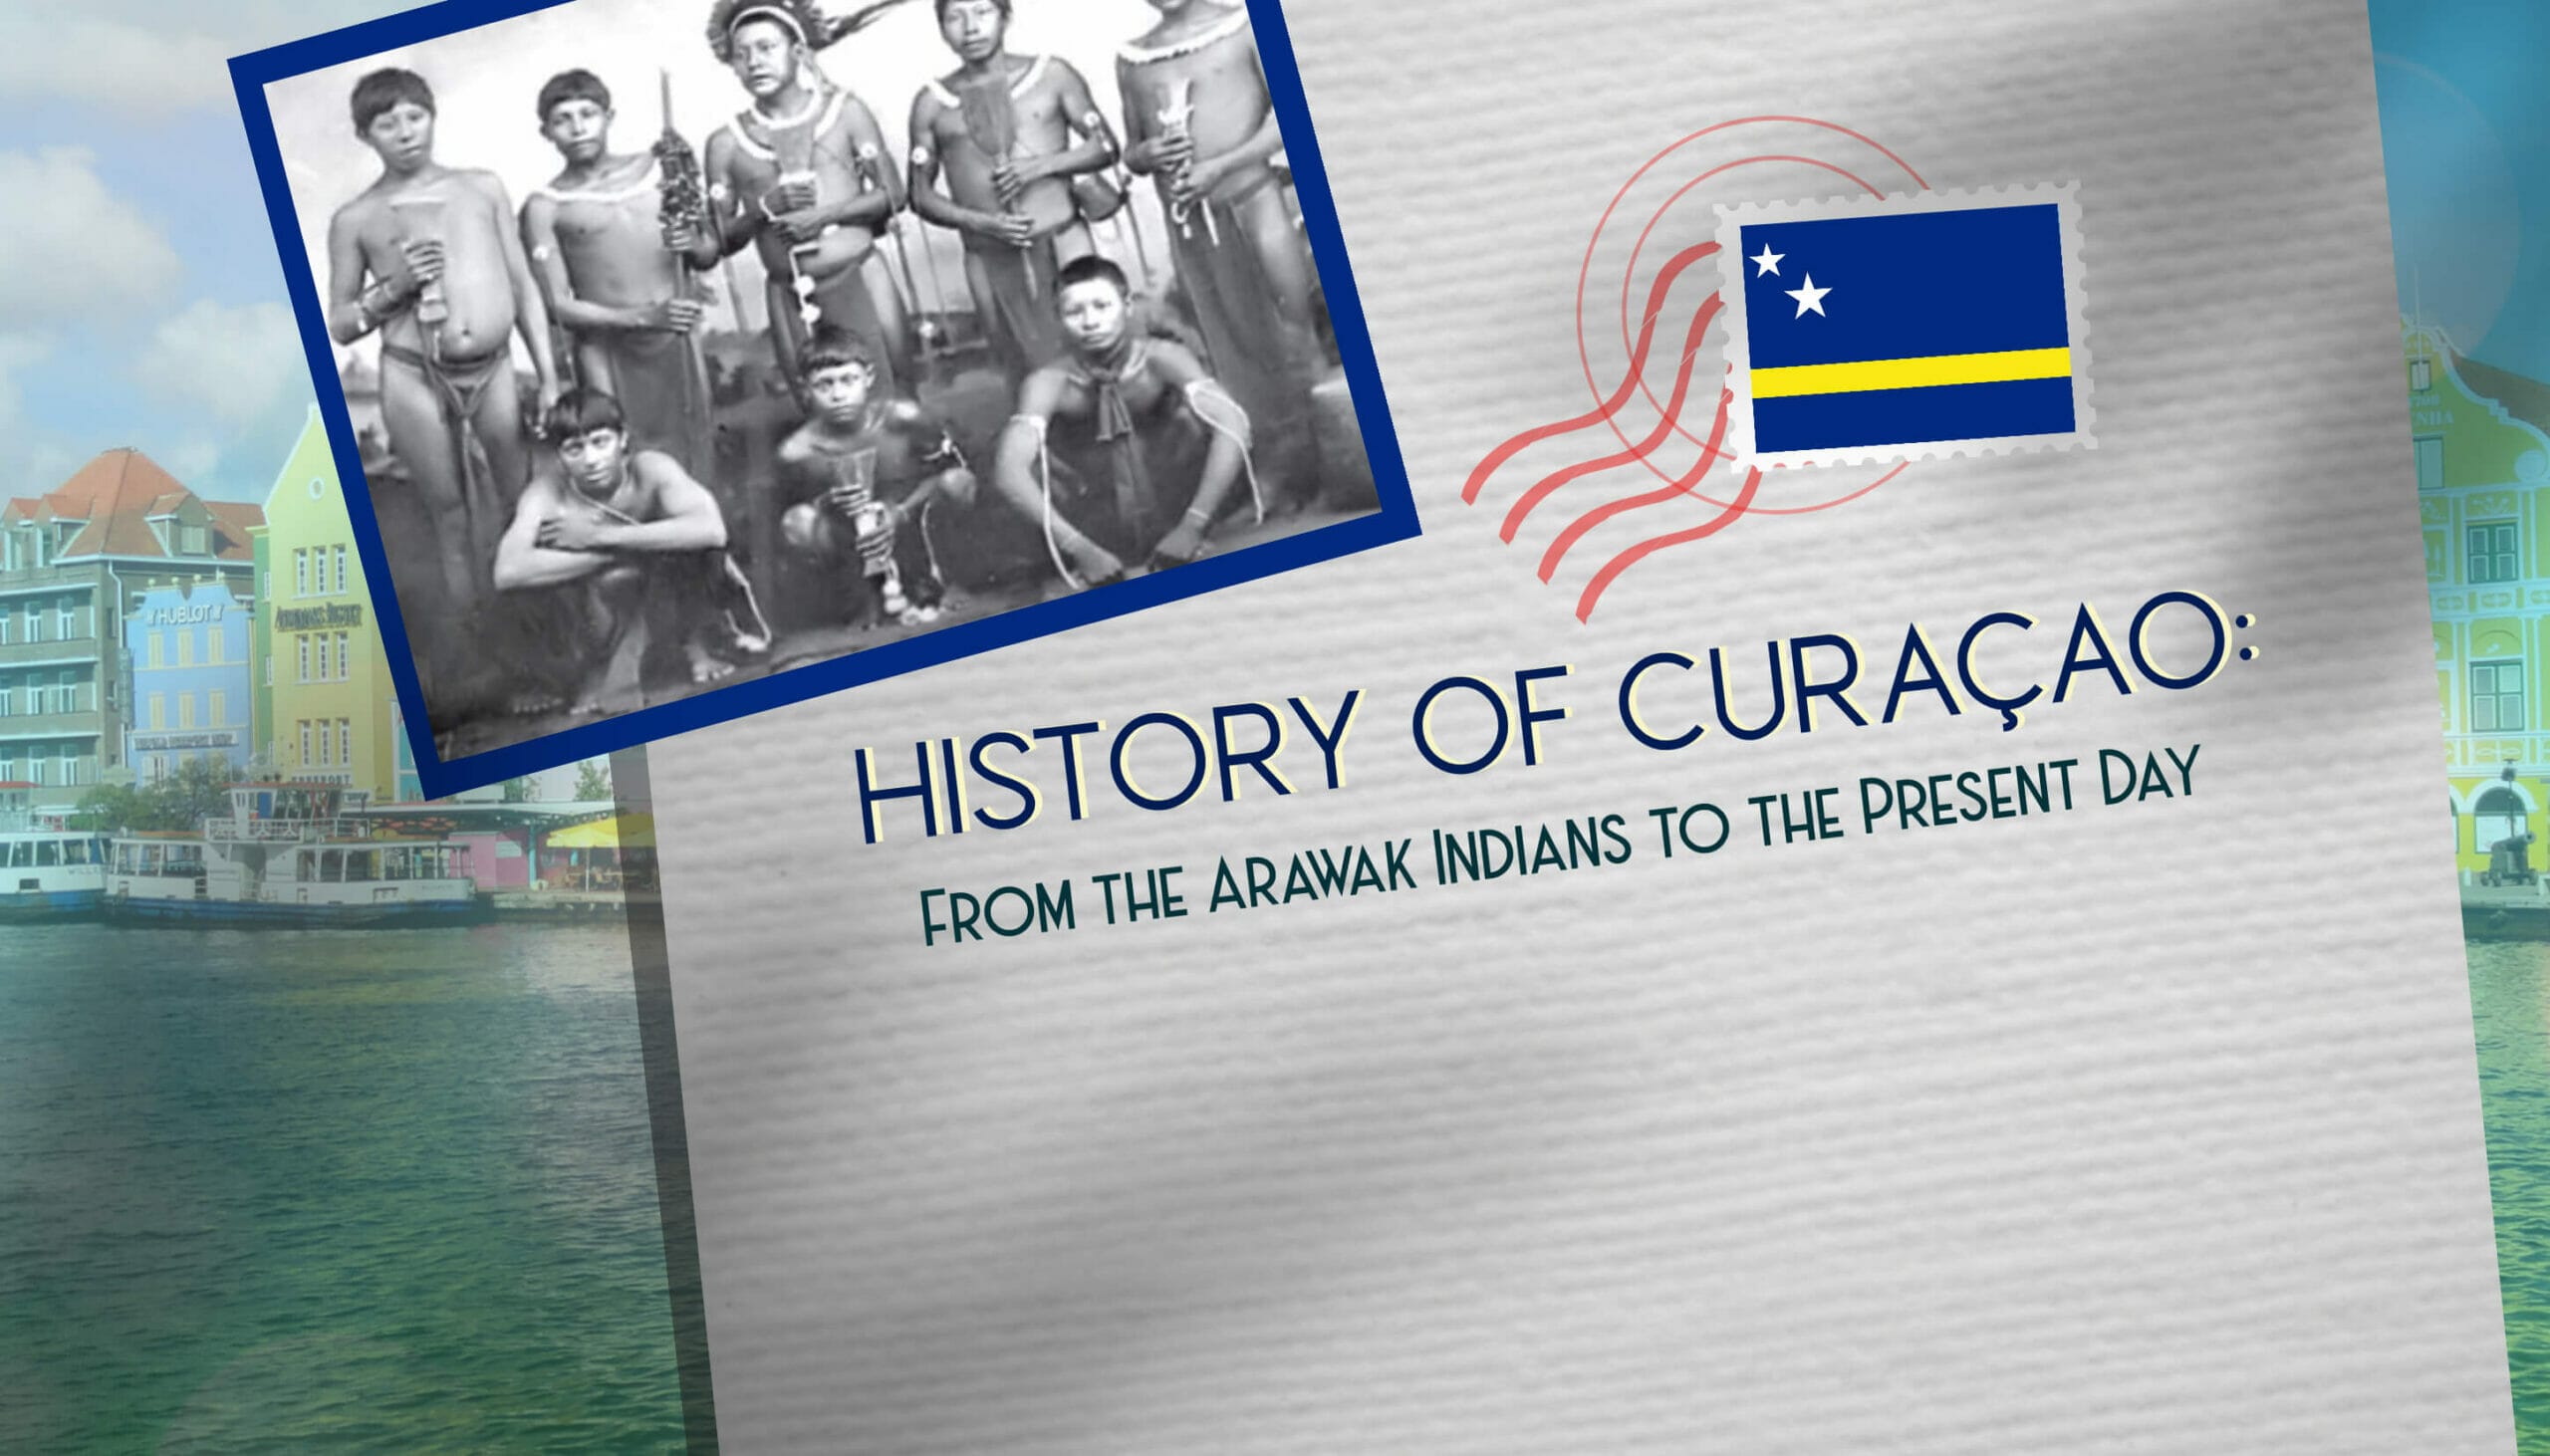 History of Curaçao From the Arawak Indians to the Present Day